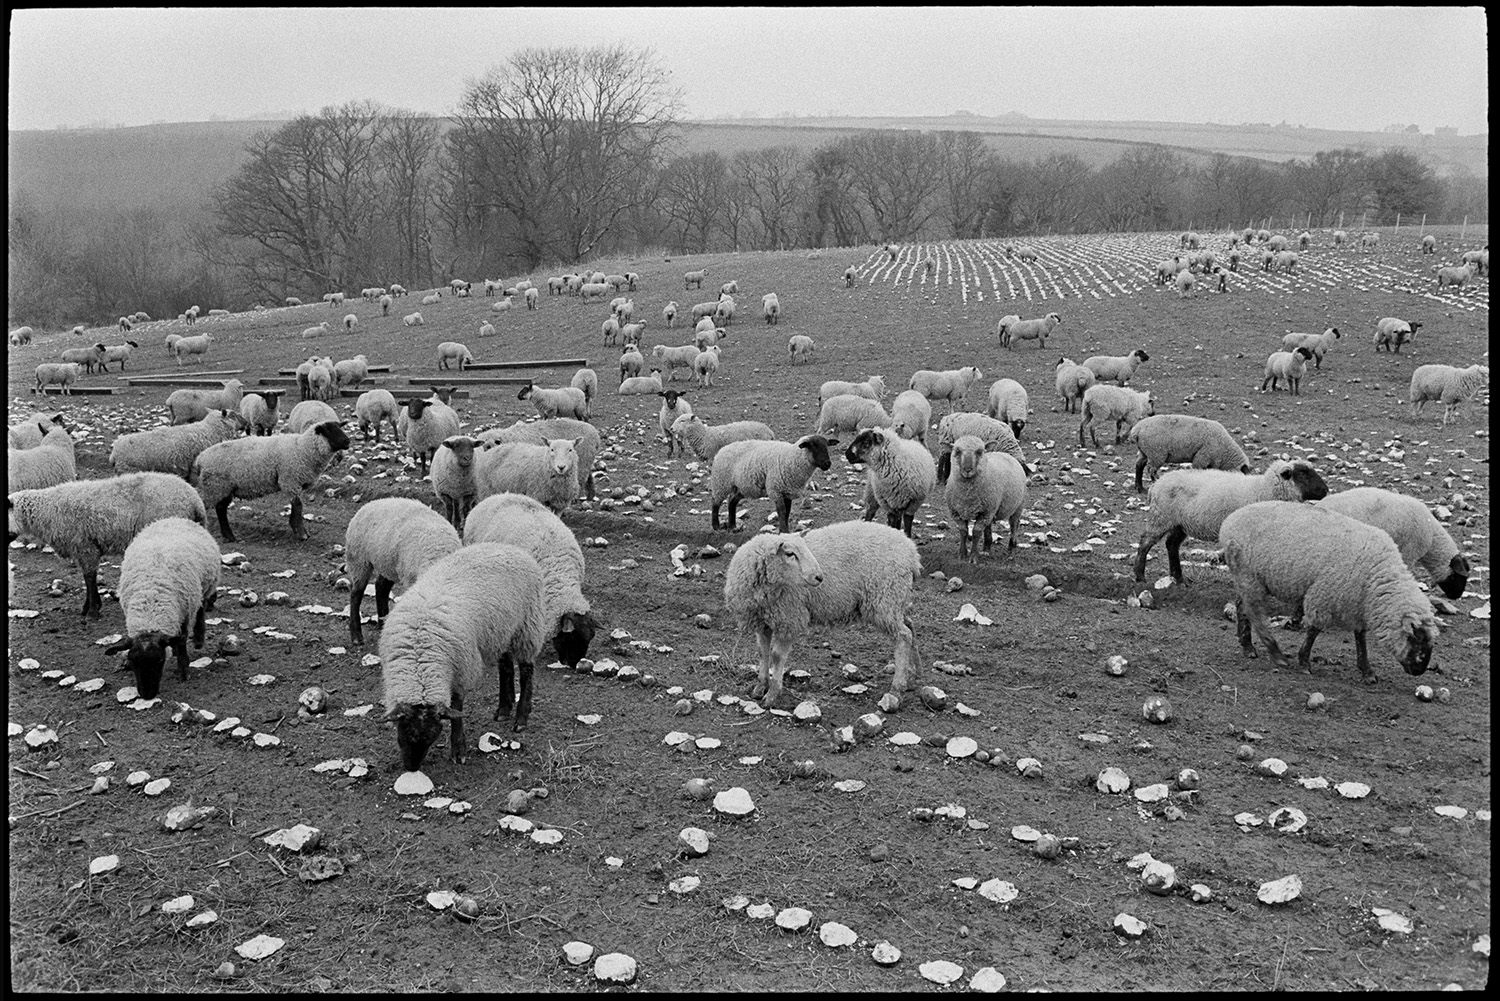 Sheep in field with mangles. 
[Sheep eating mangolds or mangelwurzels in a field at Woolleigh Barton, Beaford.]